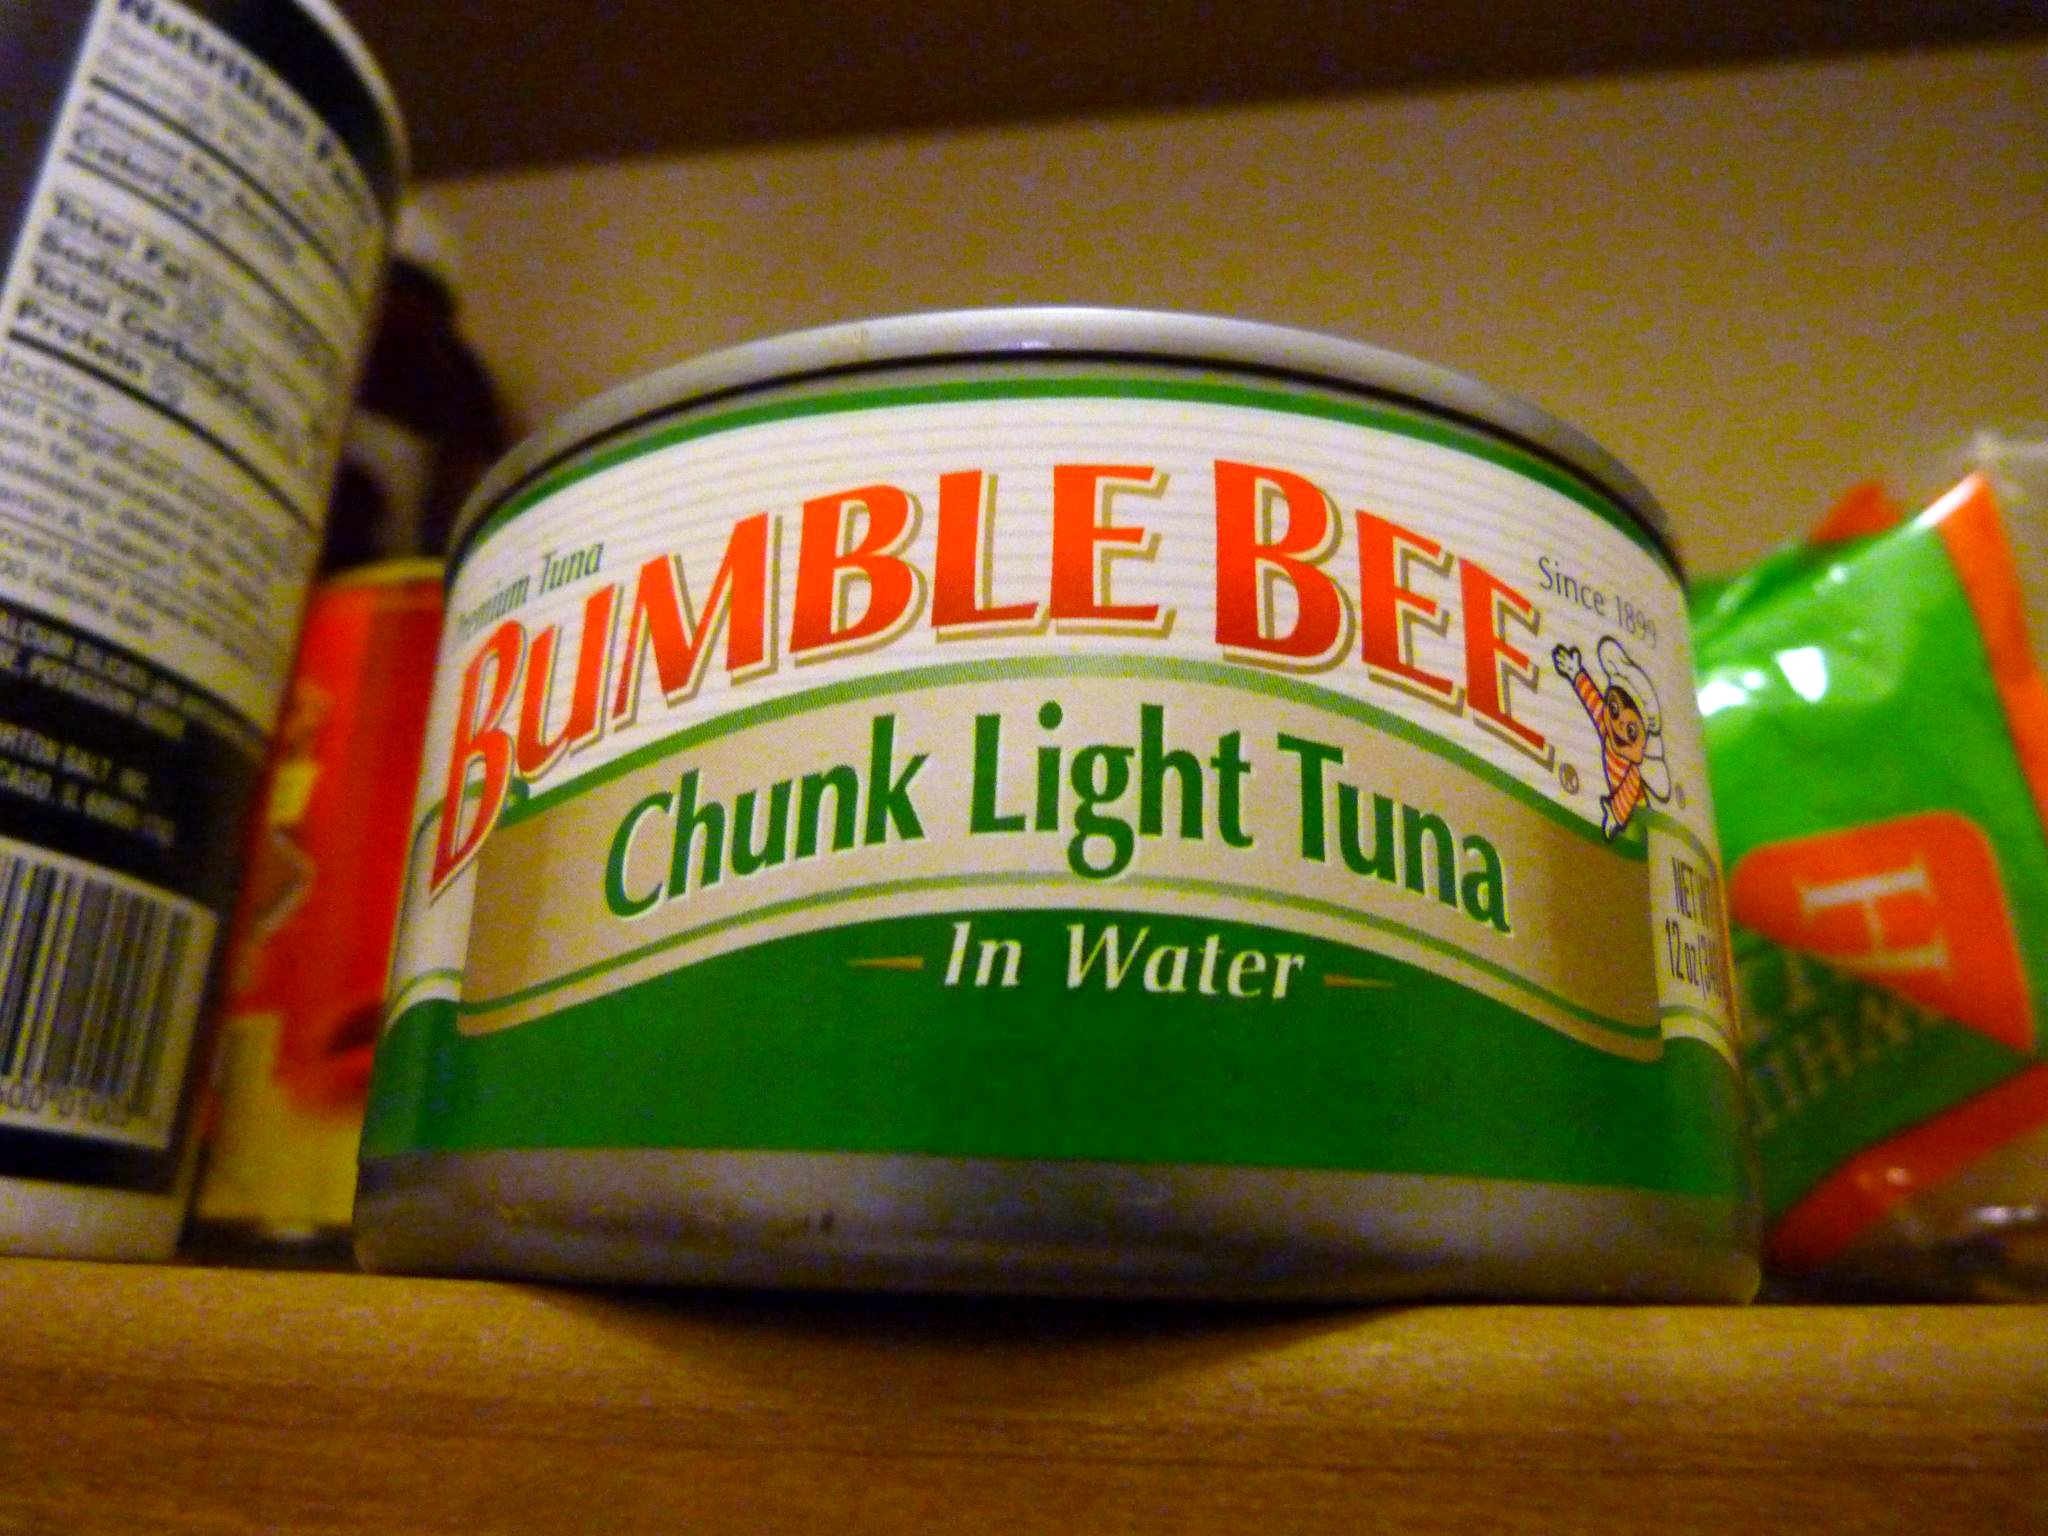 Bumble Bee issues recall of canned tuna that could lead to death if eaten